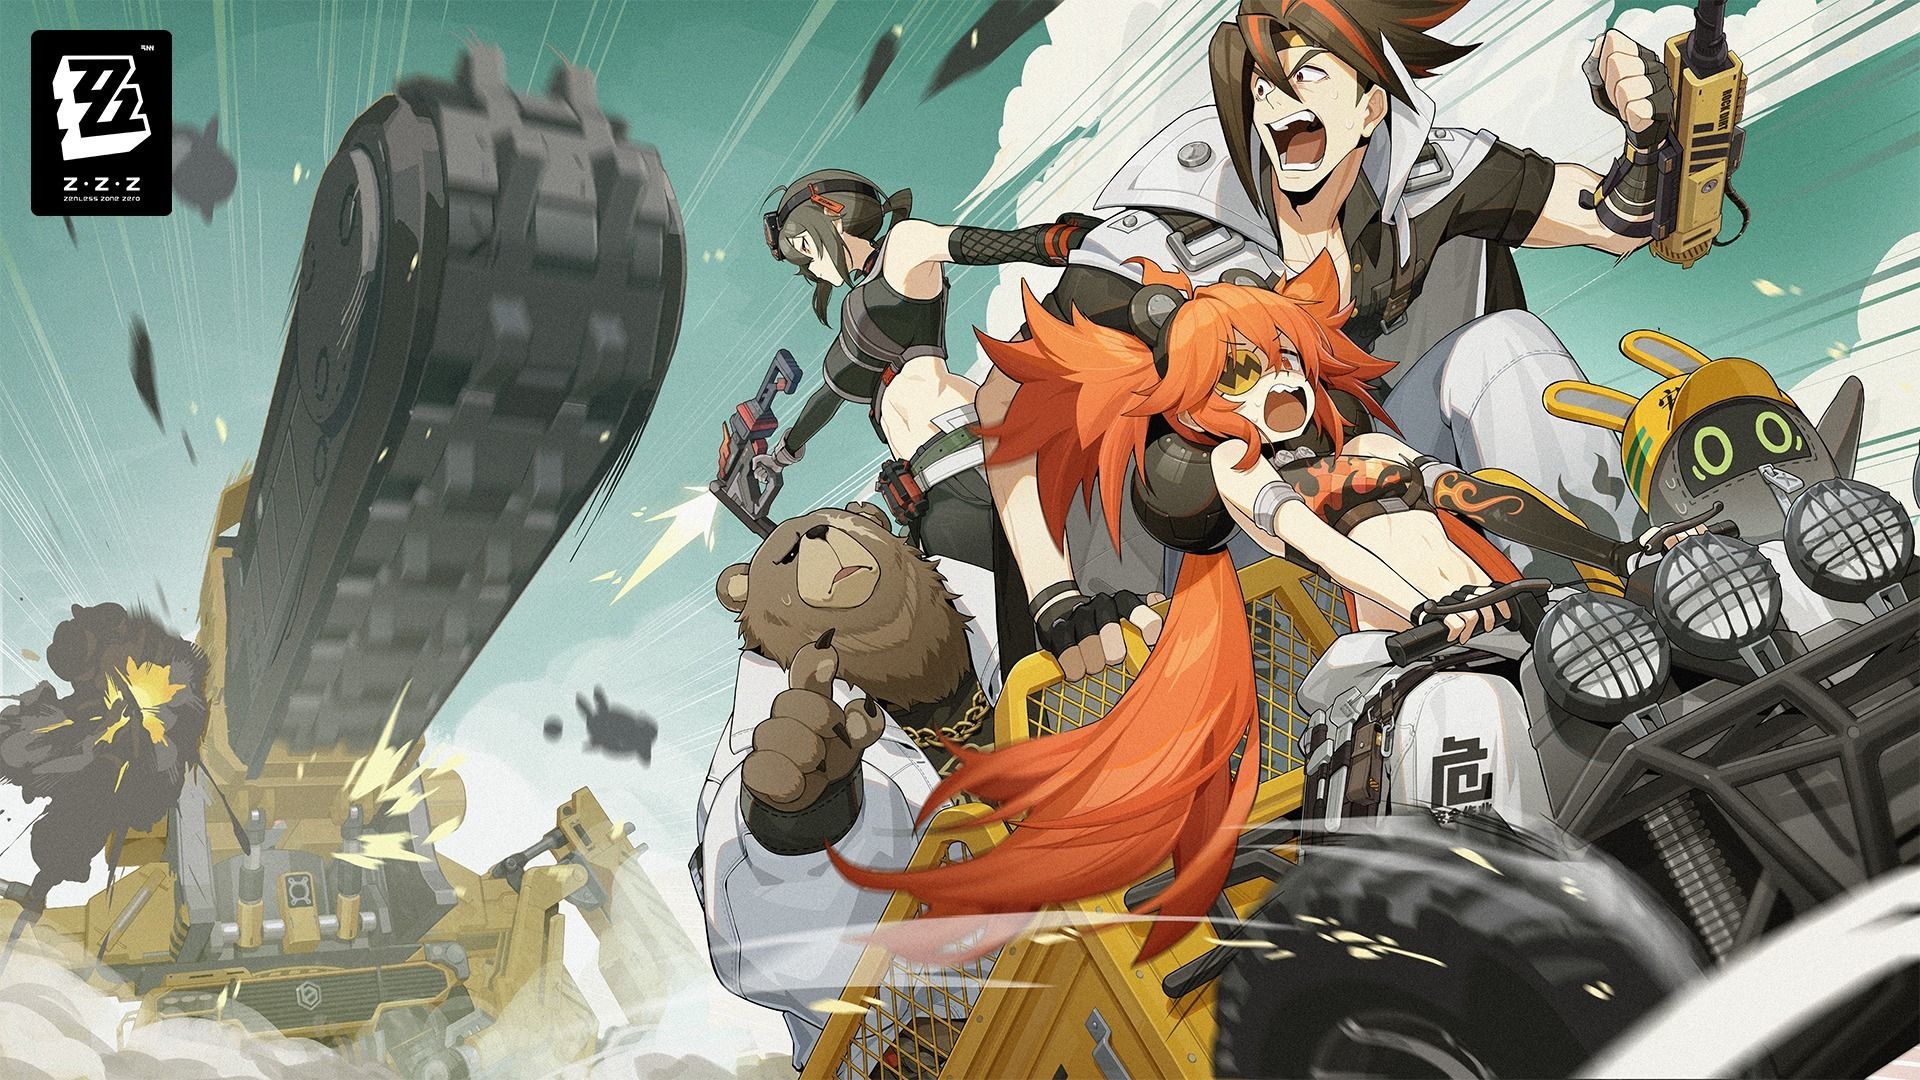 Zenless Zone Zero offers up a release date for upcoming closed beta test  and it's very soon